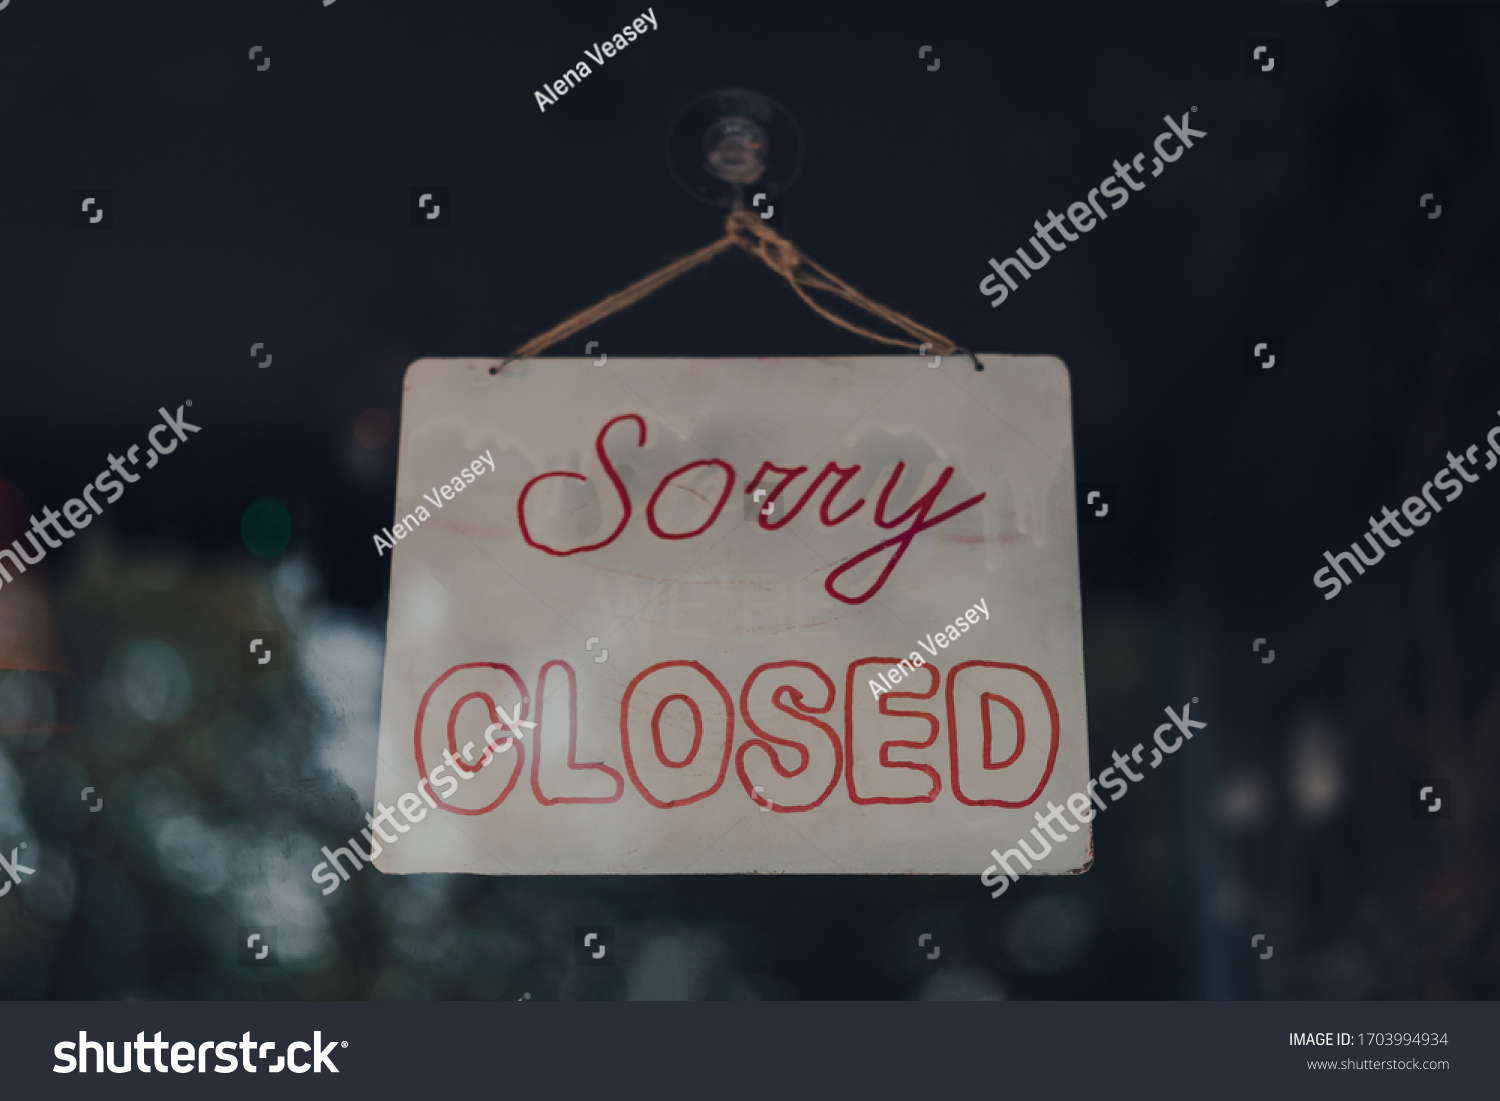 "Sorry we are closed" sign in a window of a cafe in London, UK. #1703994934